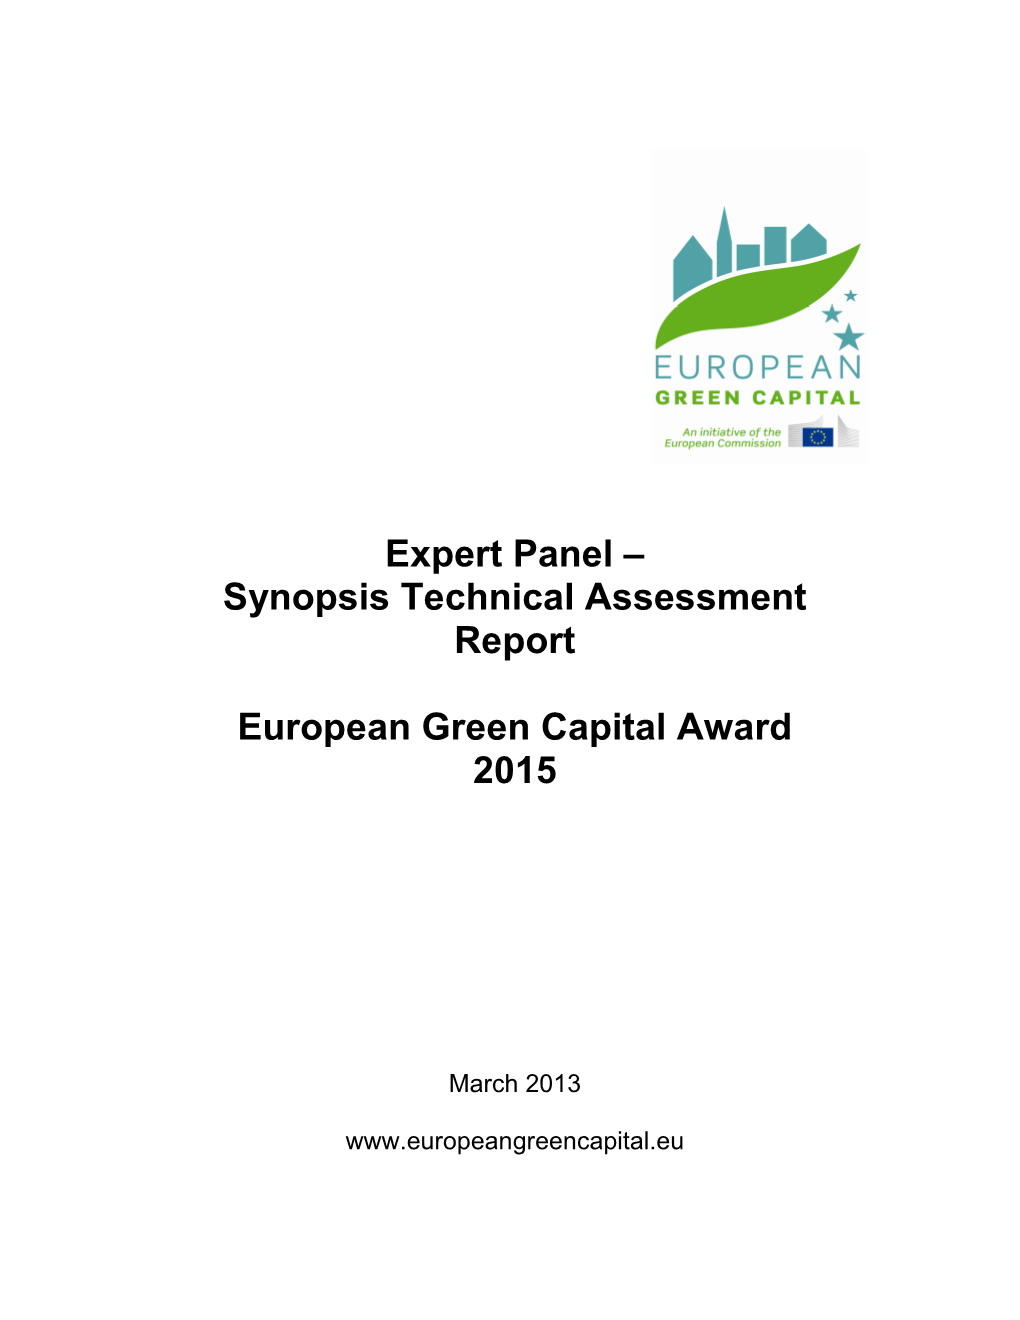 Synopsis EGCA 2015 Technical Assessment Report